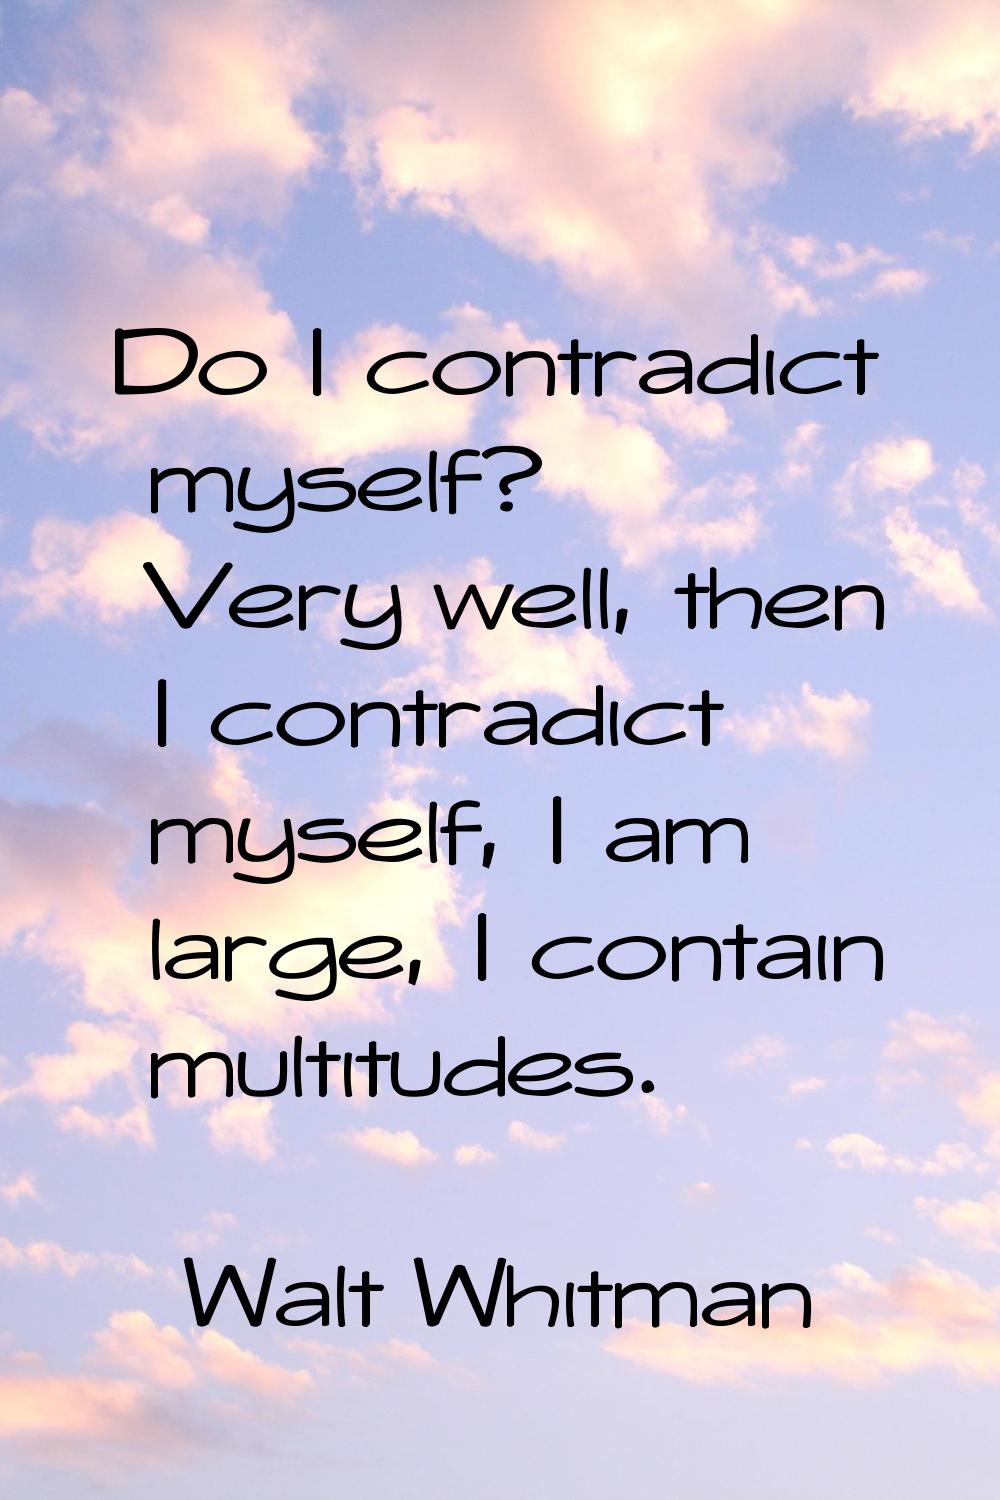 Do I contradict myself? Very well, then I contradict myself, I am large, I contain multitudes.